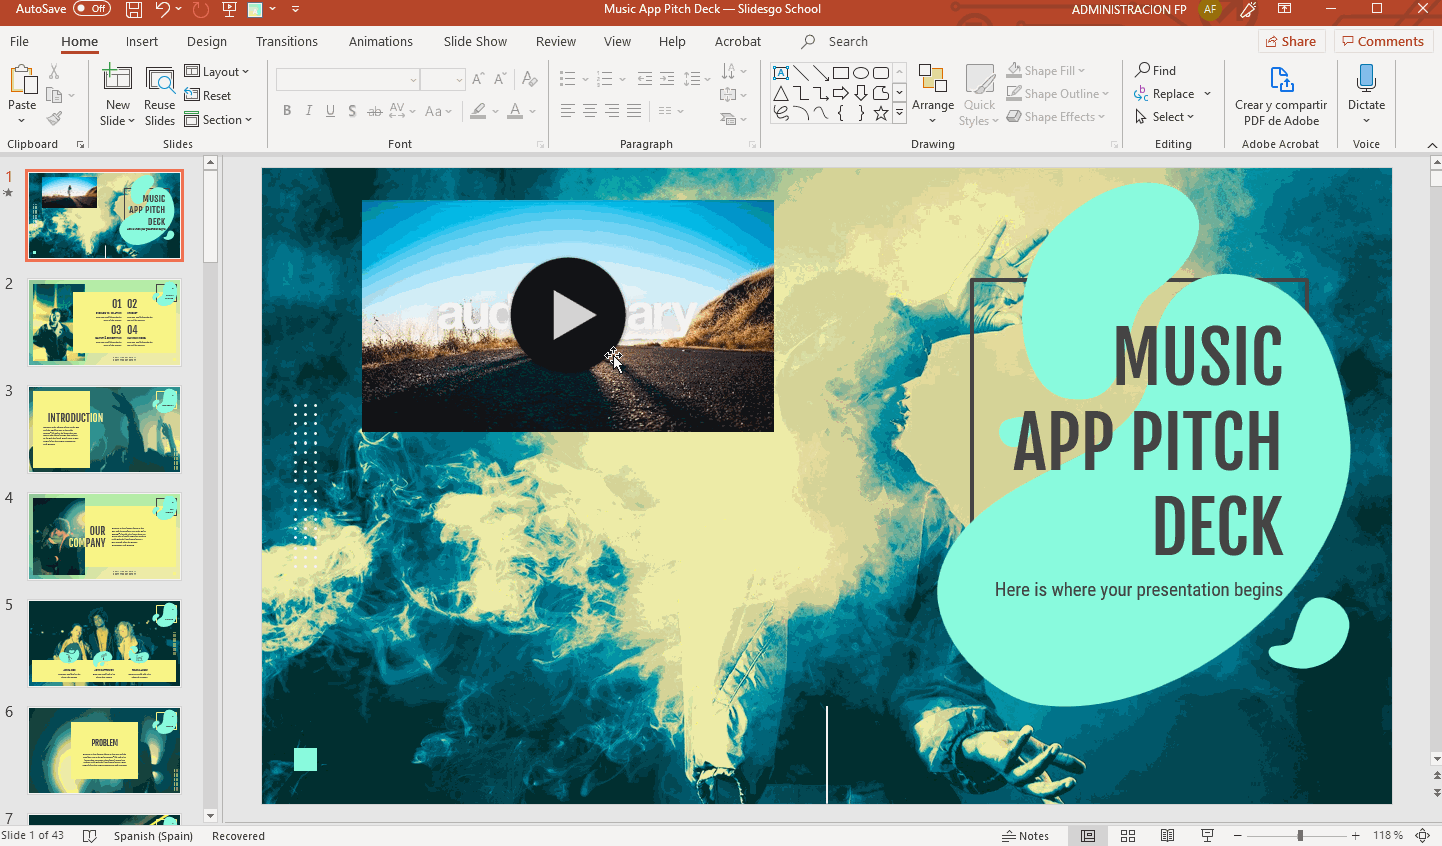 How to Add, Record or Edit Audio or Music in PowerPoint -17